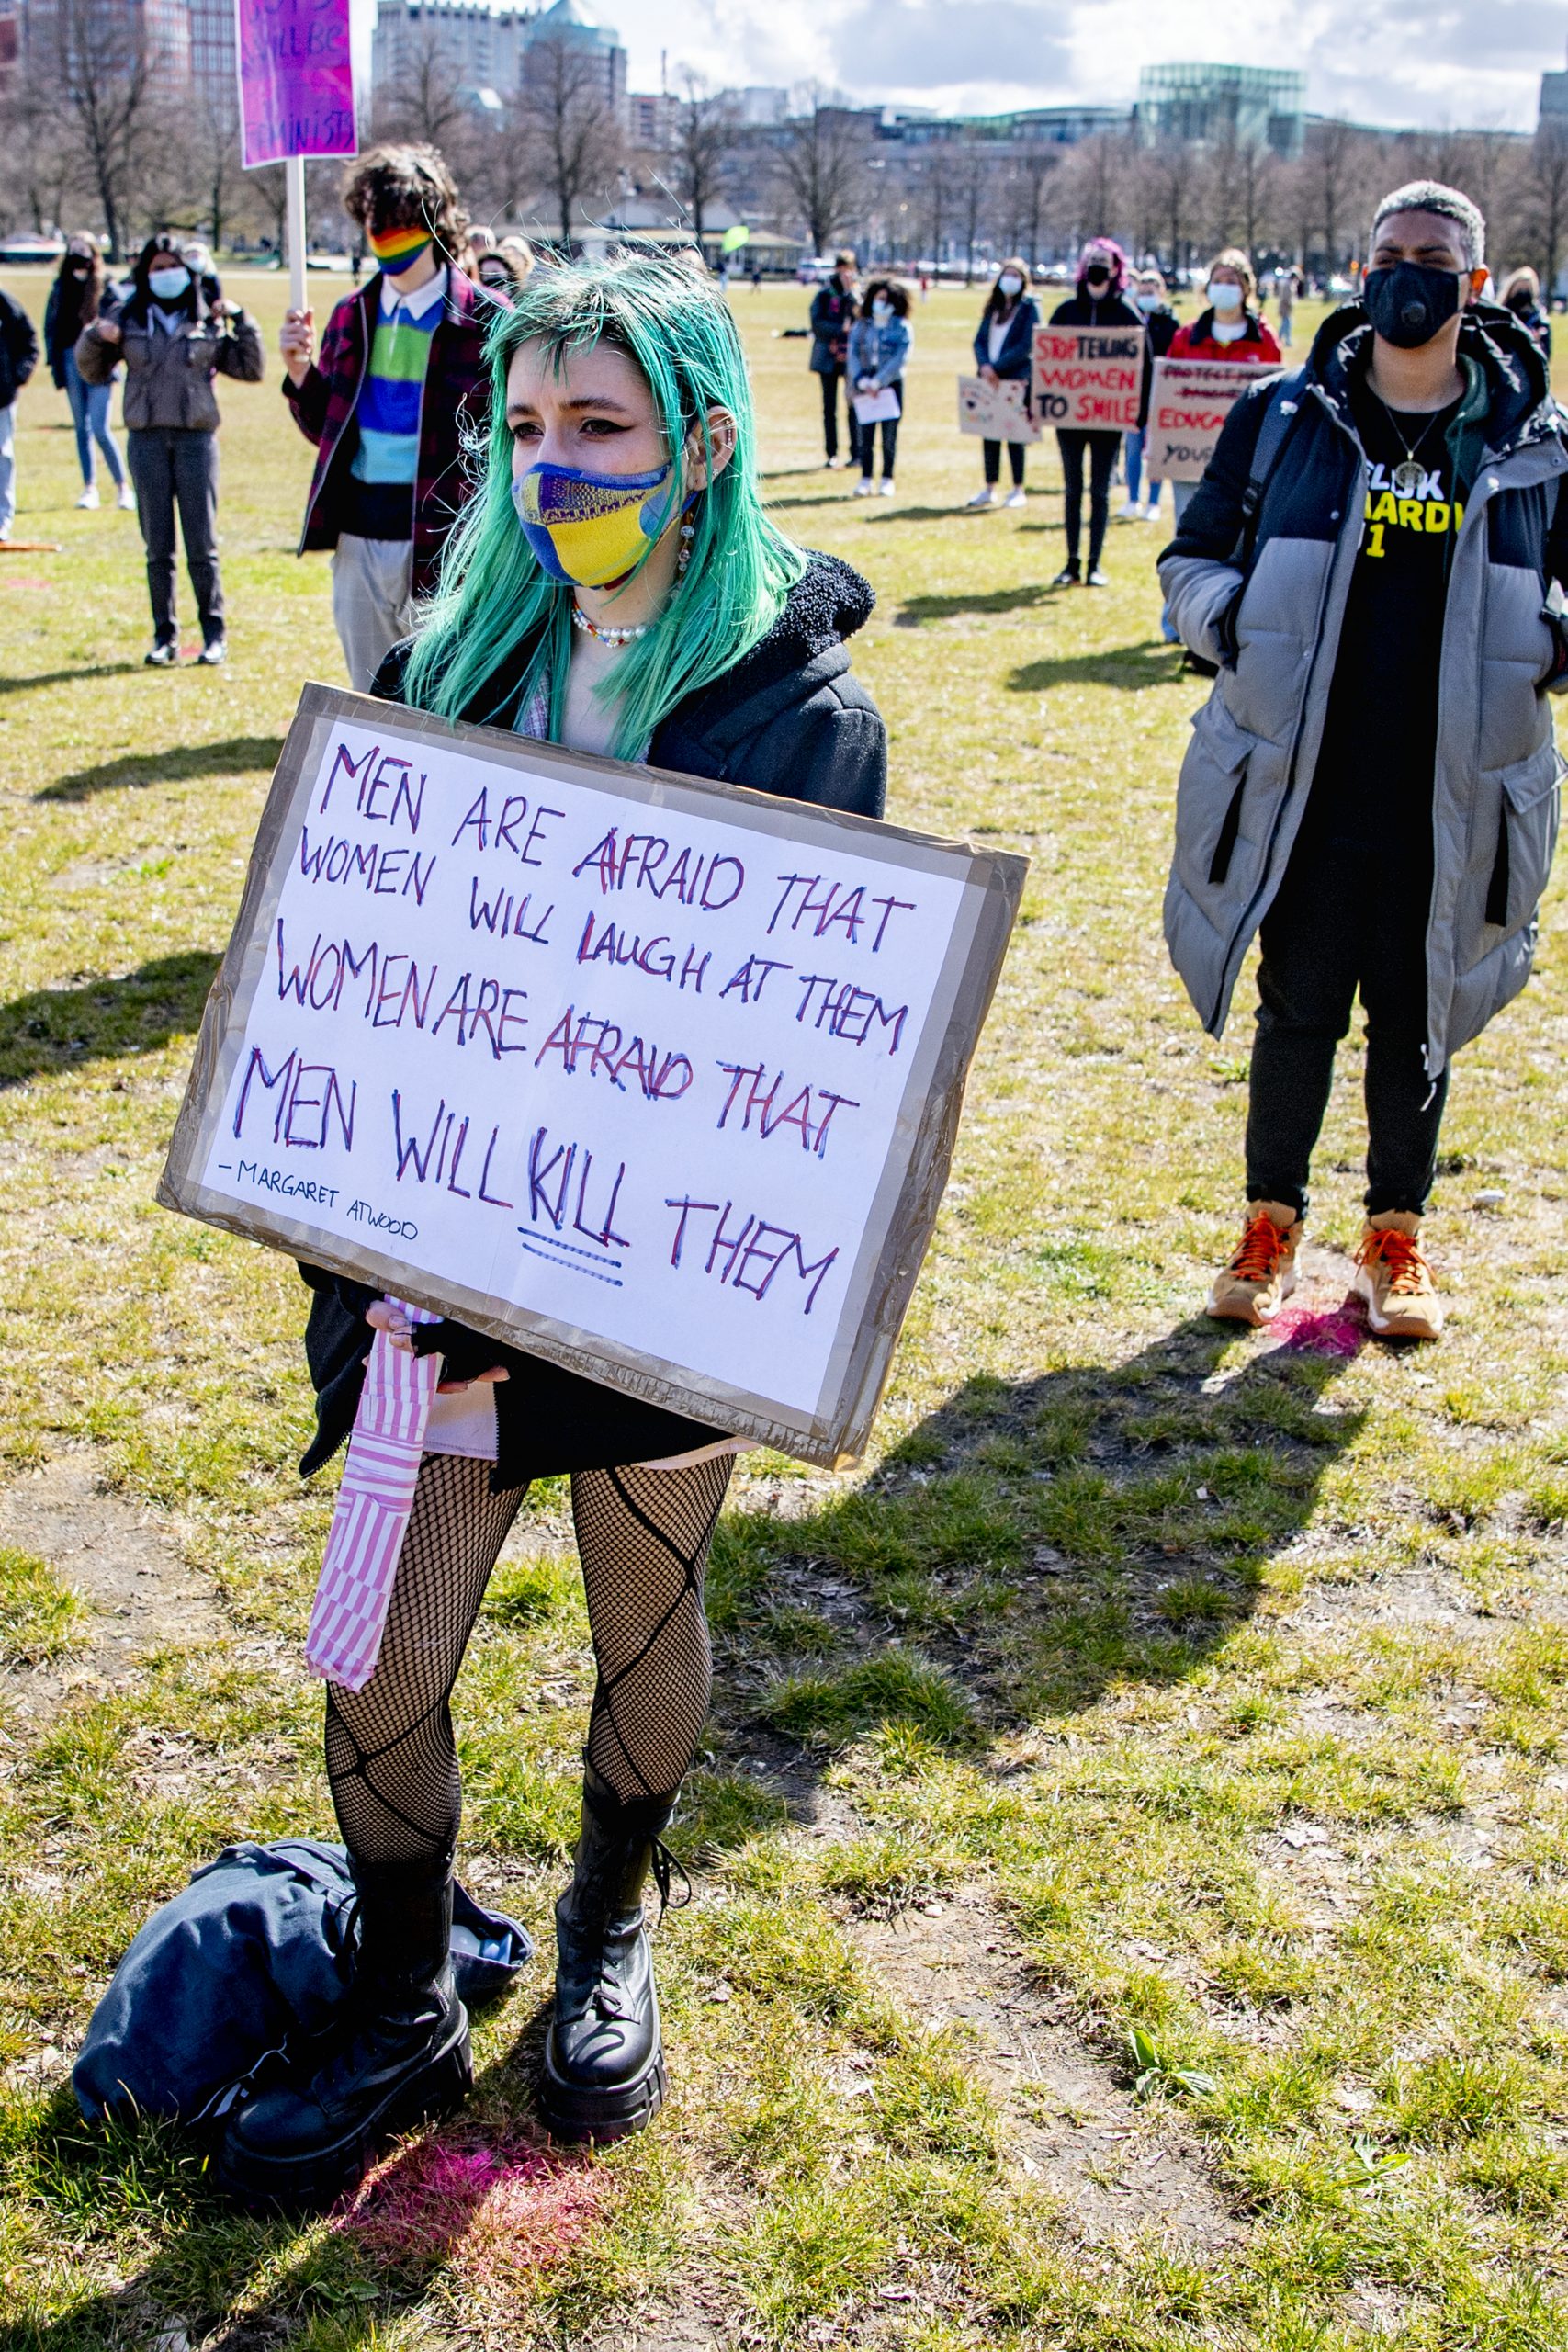 Protest sign reading "Men are afraid that women will laugh at them, women are afraid men will kill them"